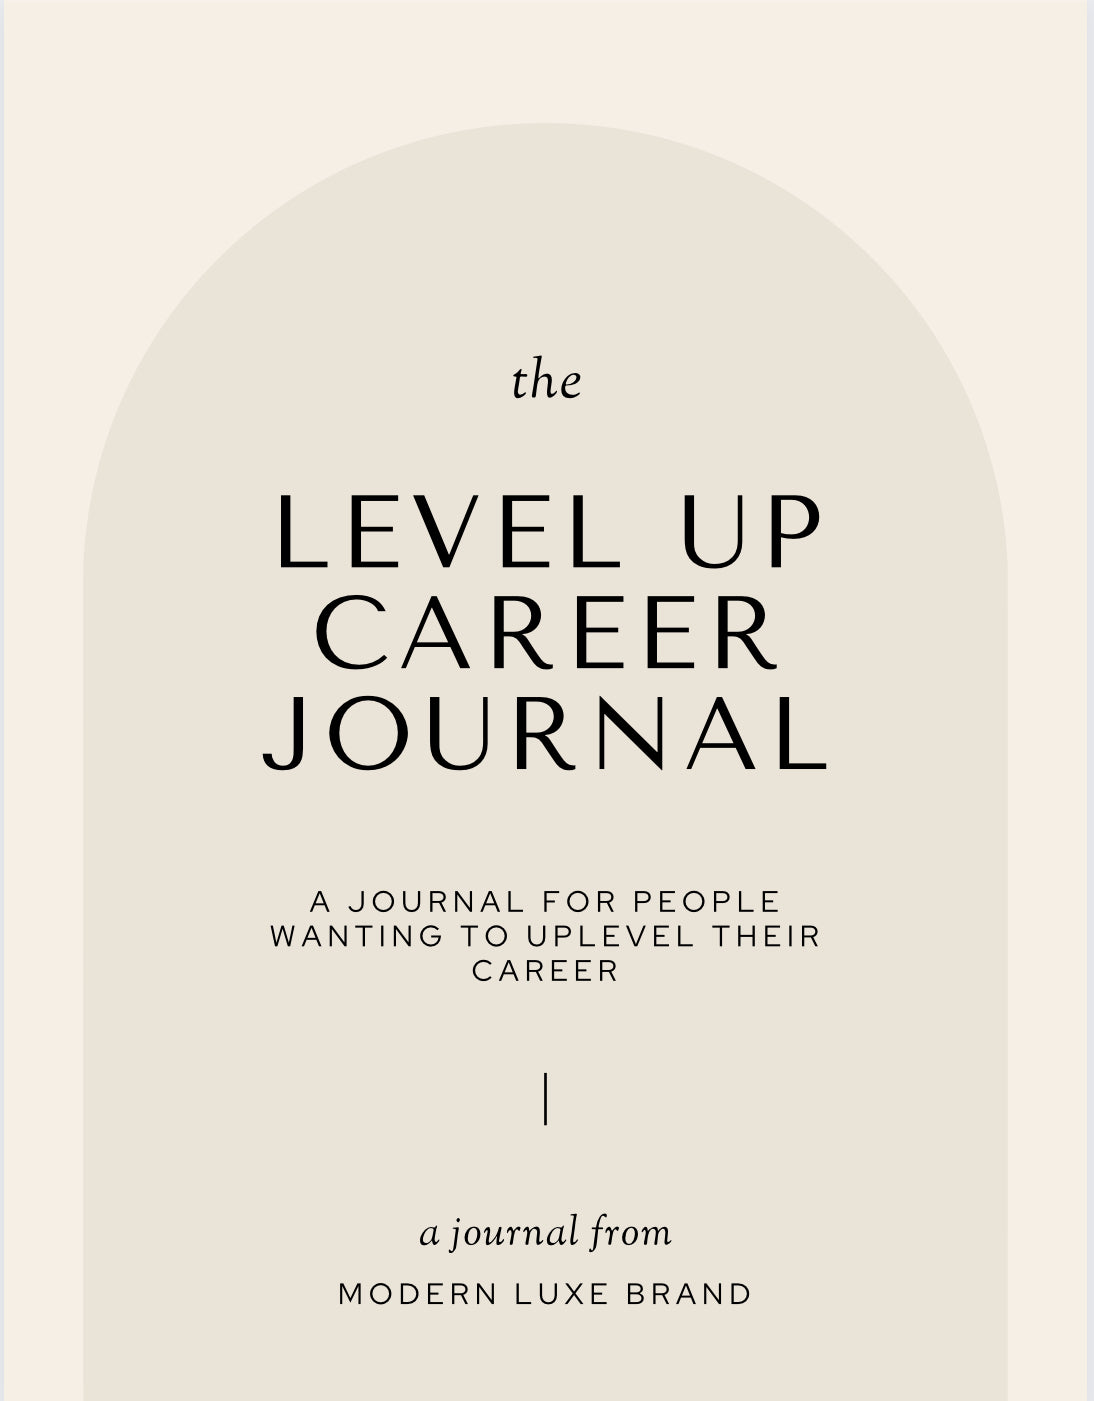 The Level Up Career Journal